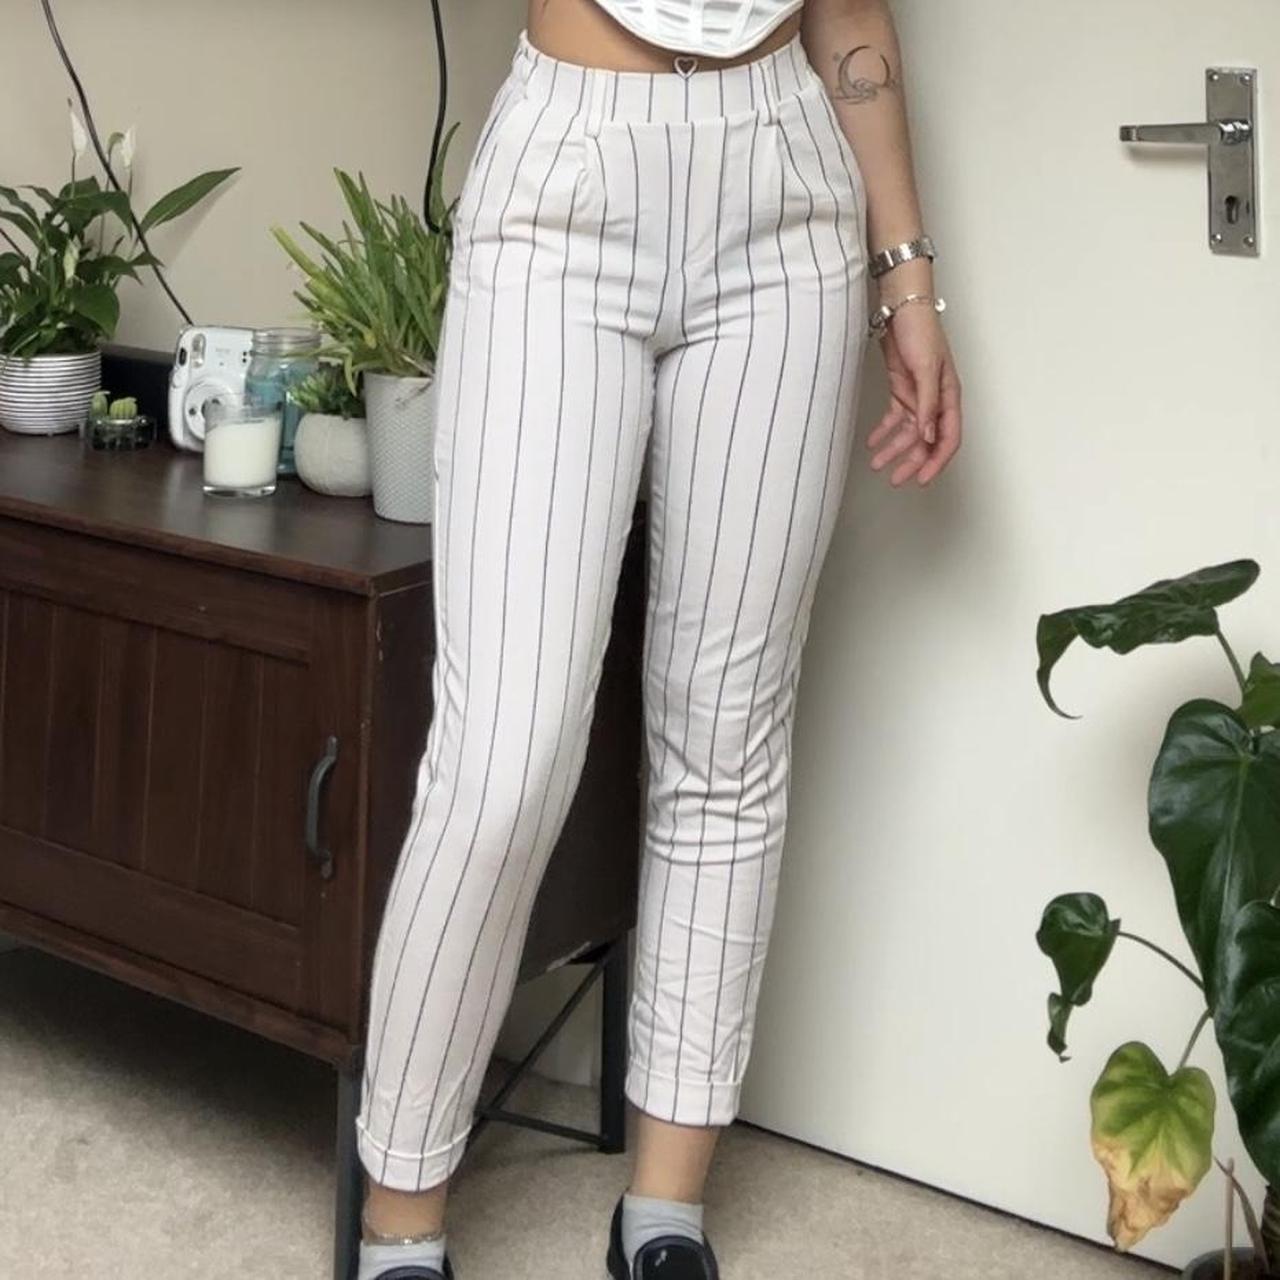 Mens Designer Embroidered Striped Track Pants Fashionable Travel, Fitness,  Streetwear Bershka Trousers With Skinny Fit And Sweatpants For Leisure And  Everyday Wear From Gigifashion, $48.71 | DHgate.Com